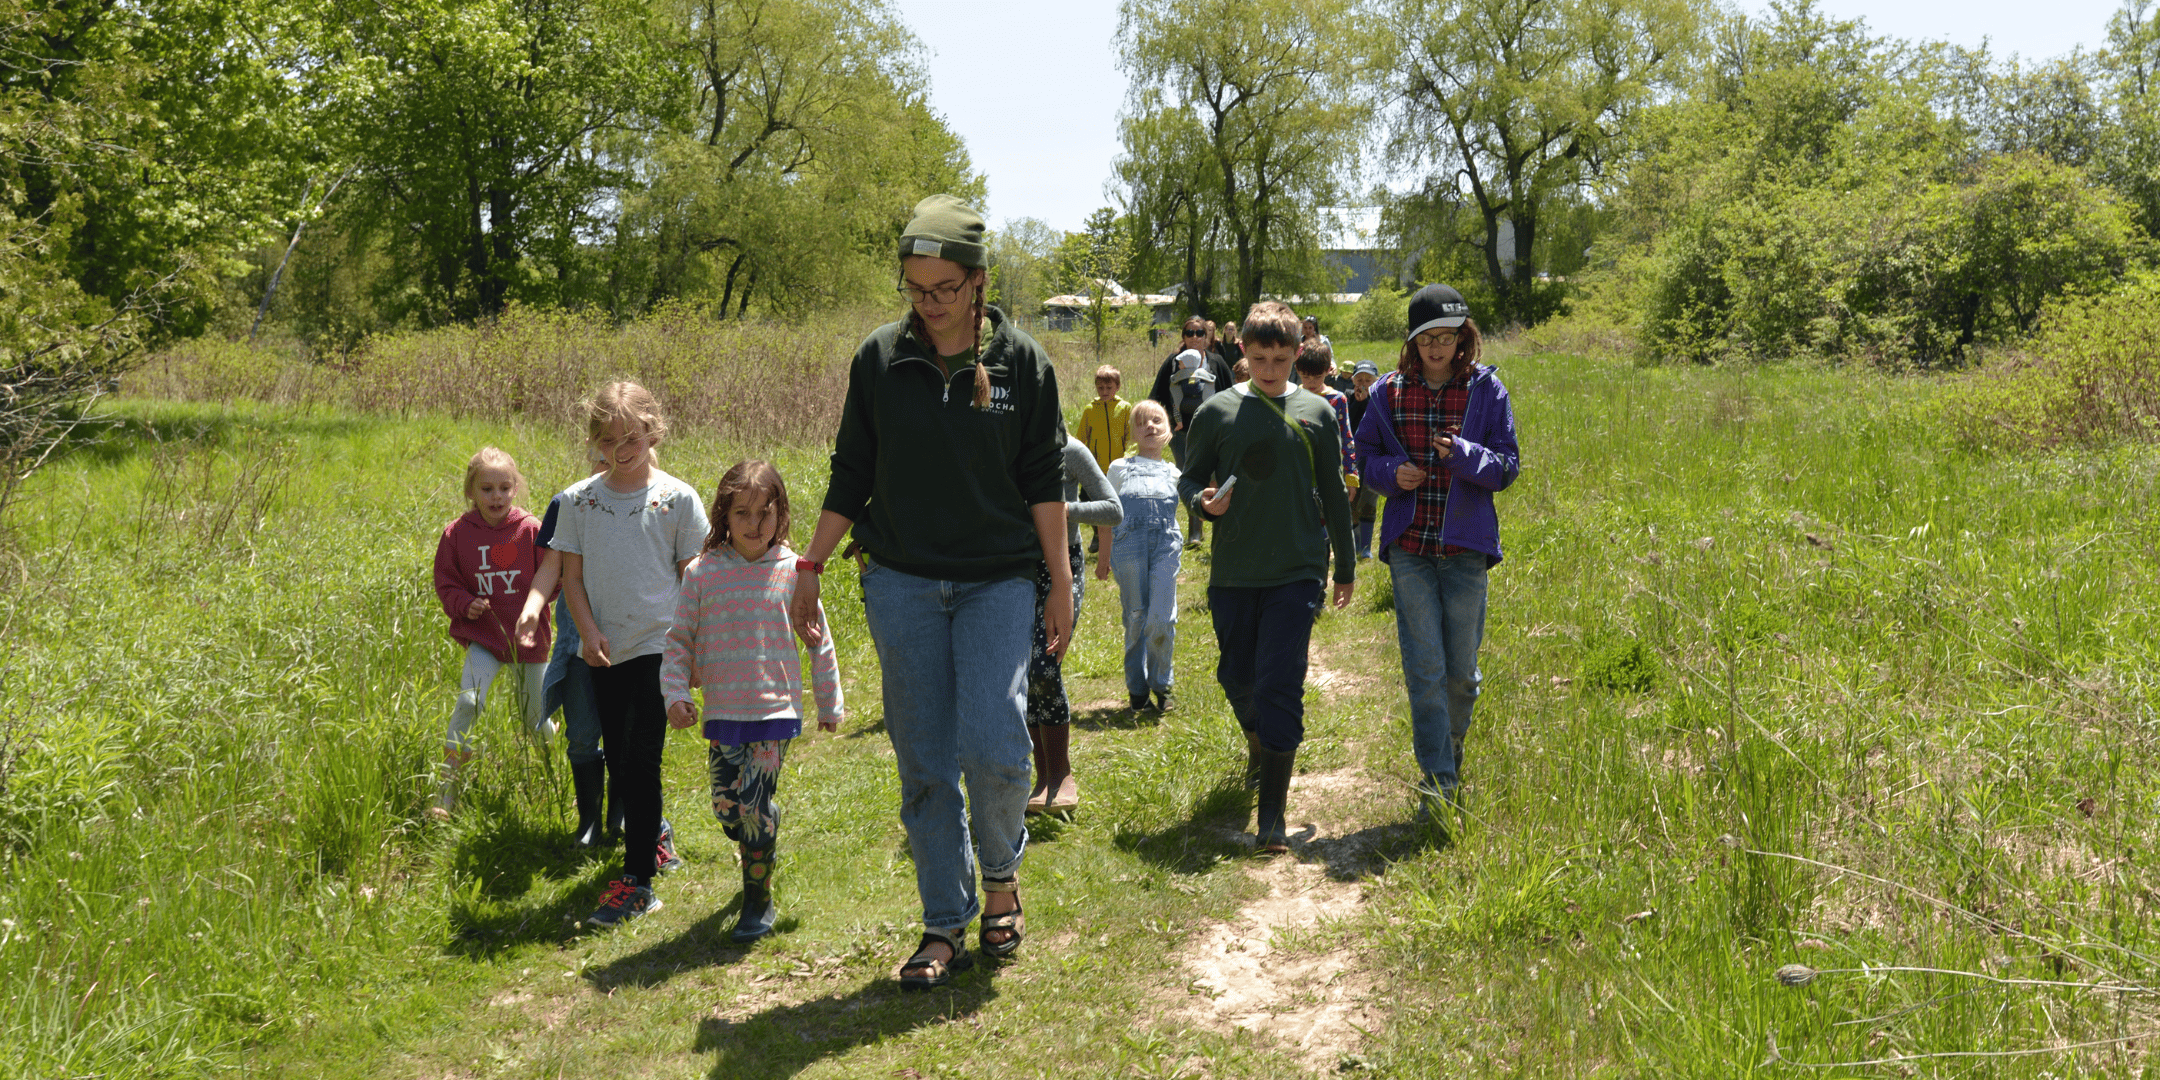 Jacoba, Program Coordinator, leading a group of children on a walk in the field.